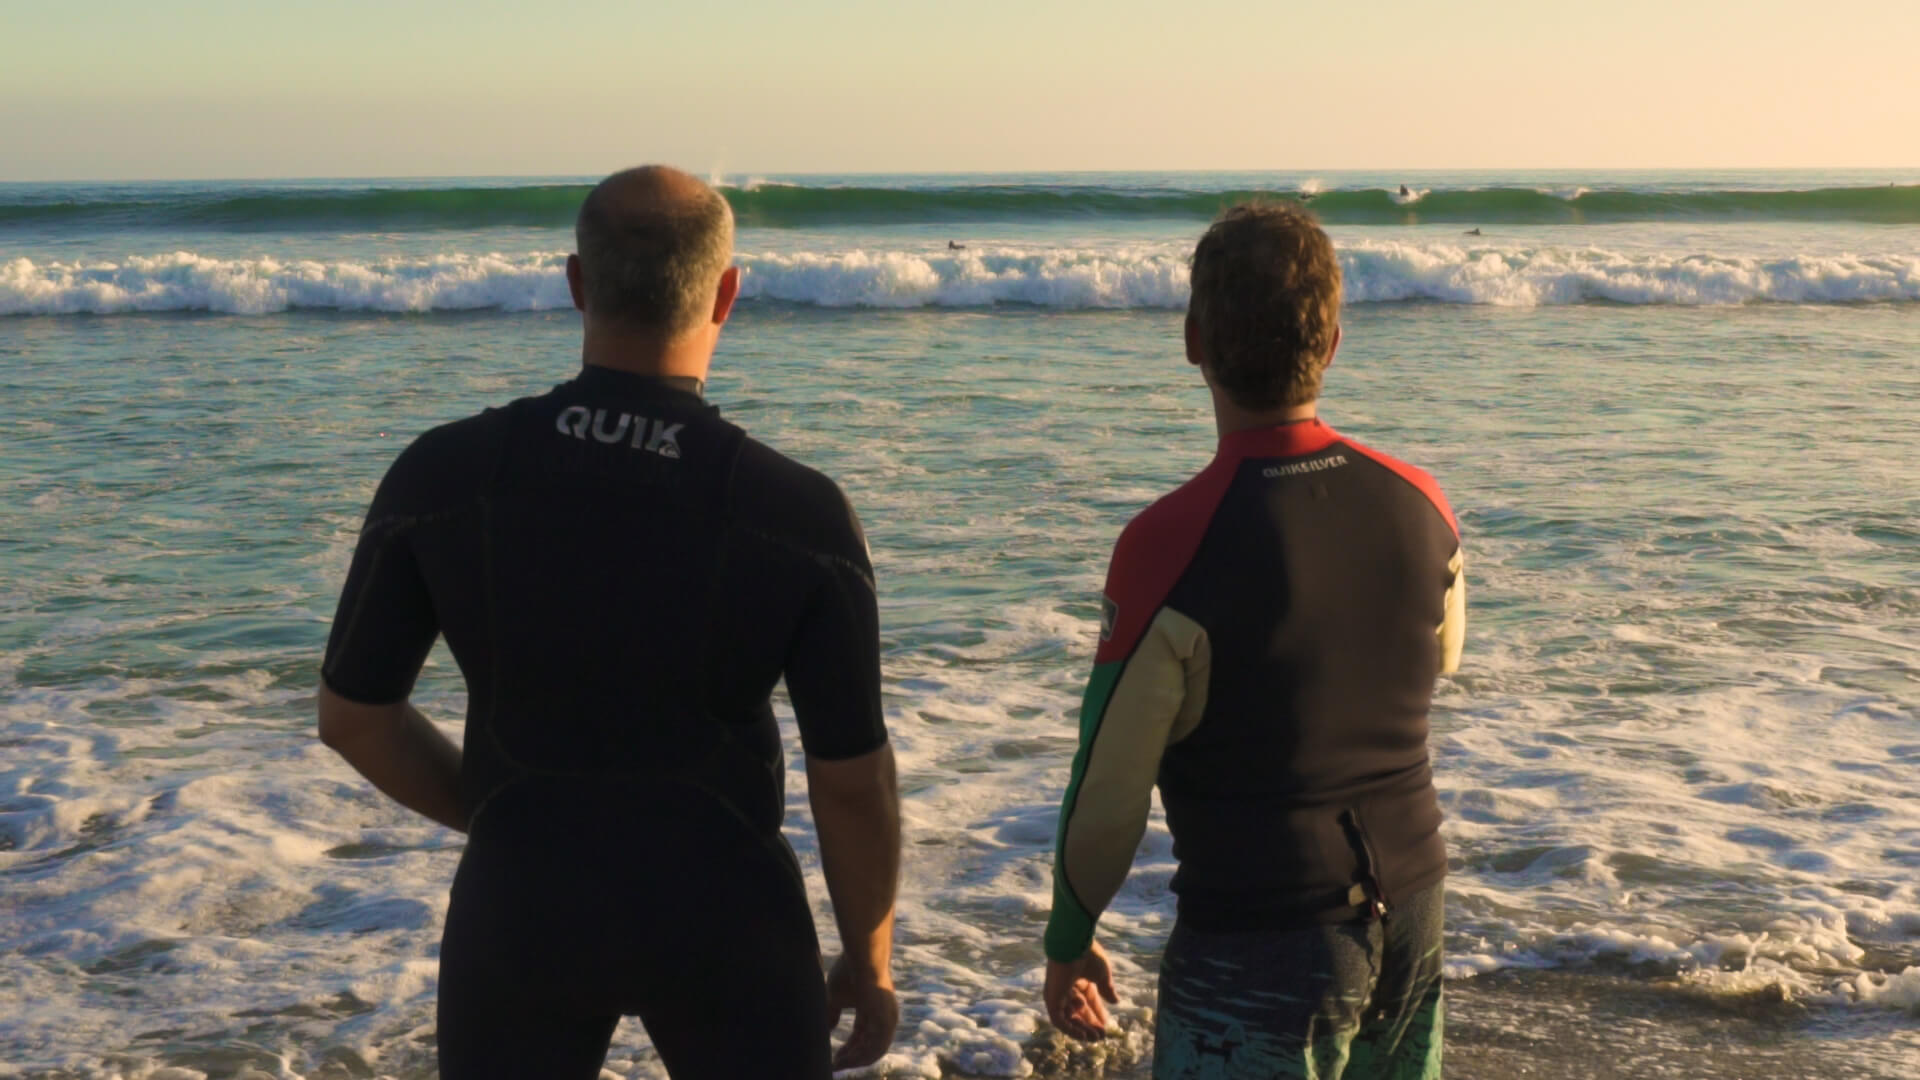 Can Surfers Change the World?